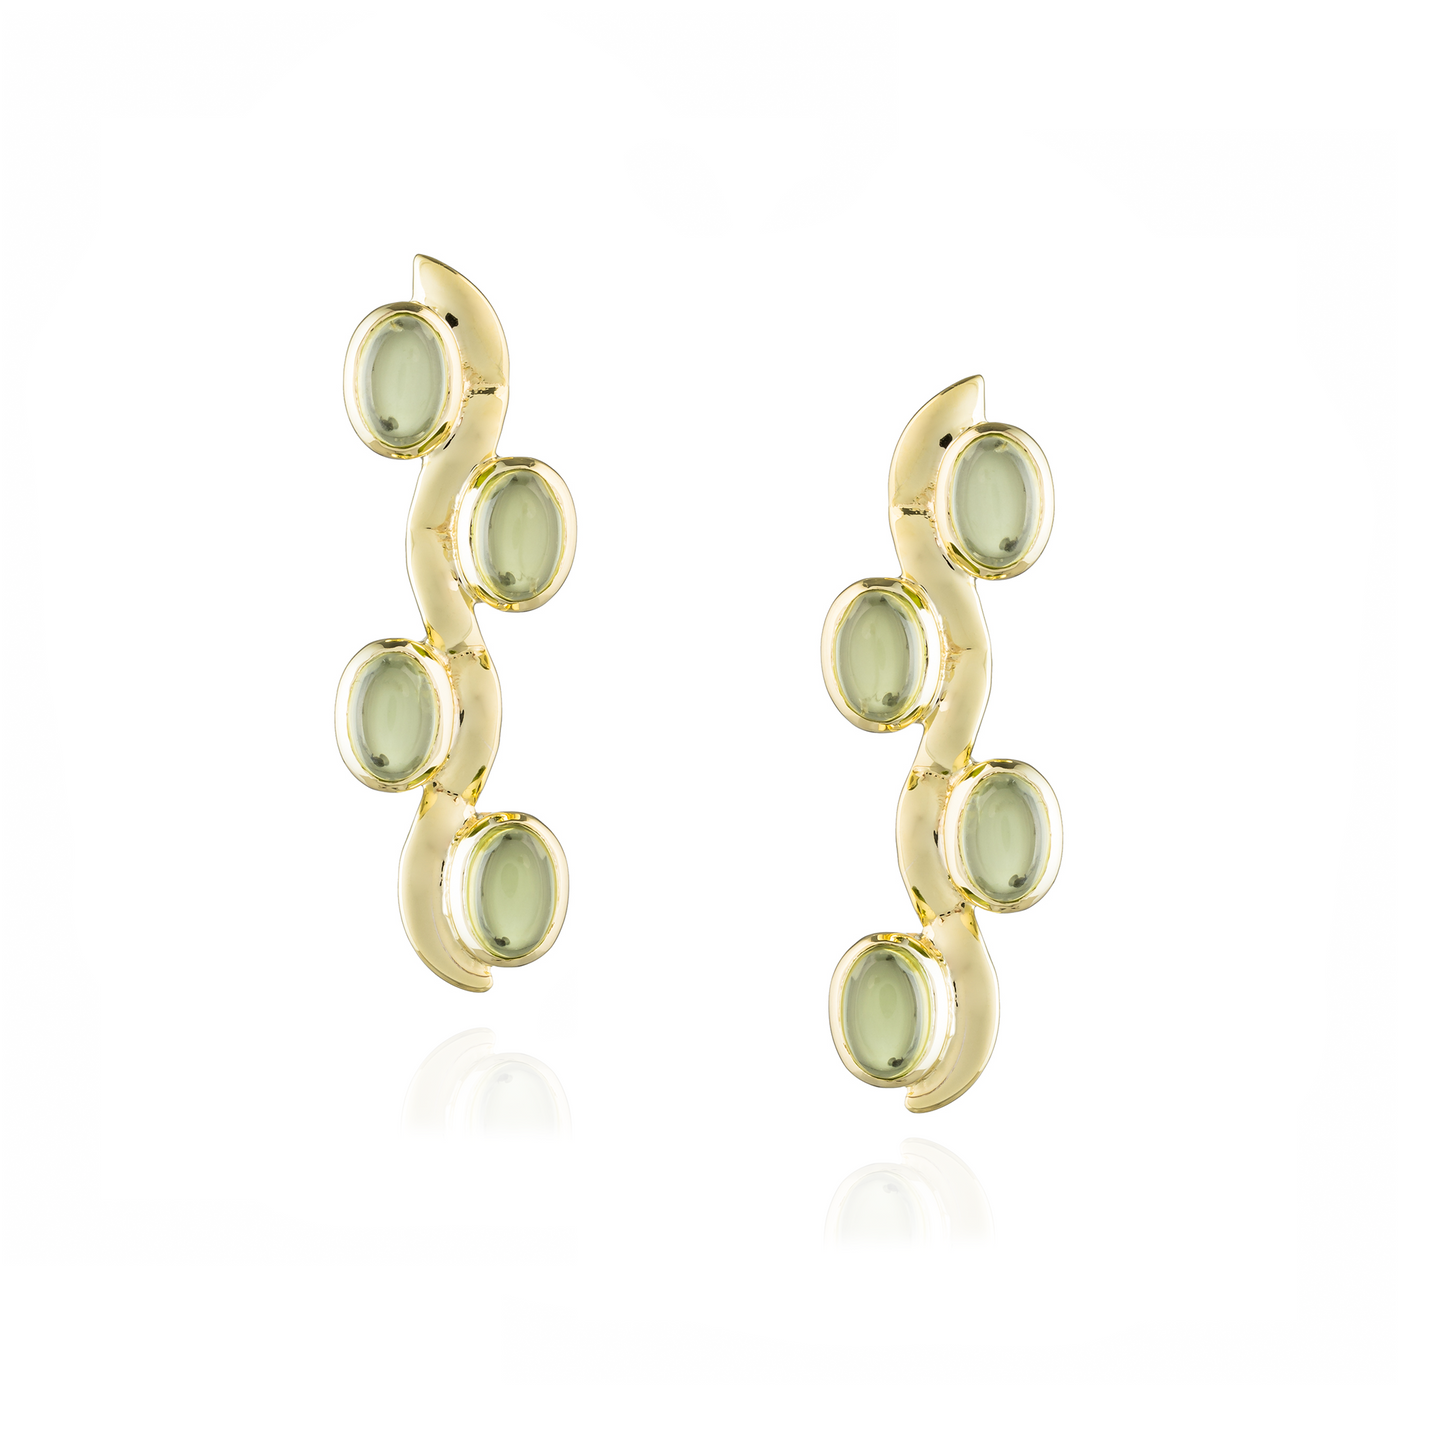 Caramelo 925 Silver Earrings plated in 18k Yellow Gold with Peridot Cabouchon.